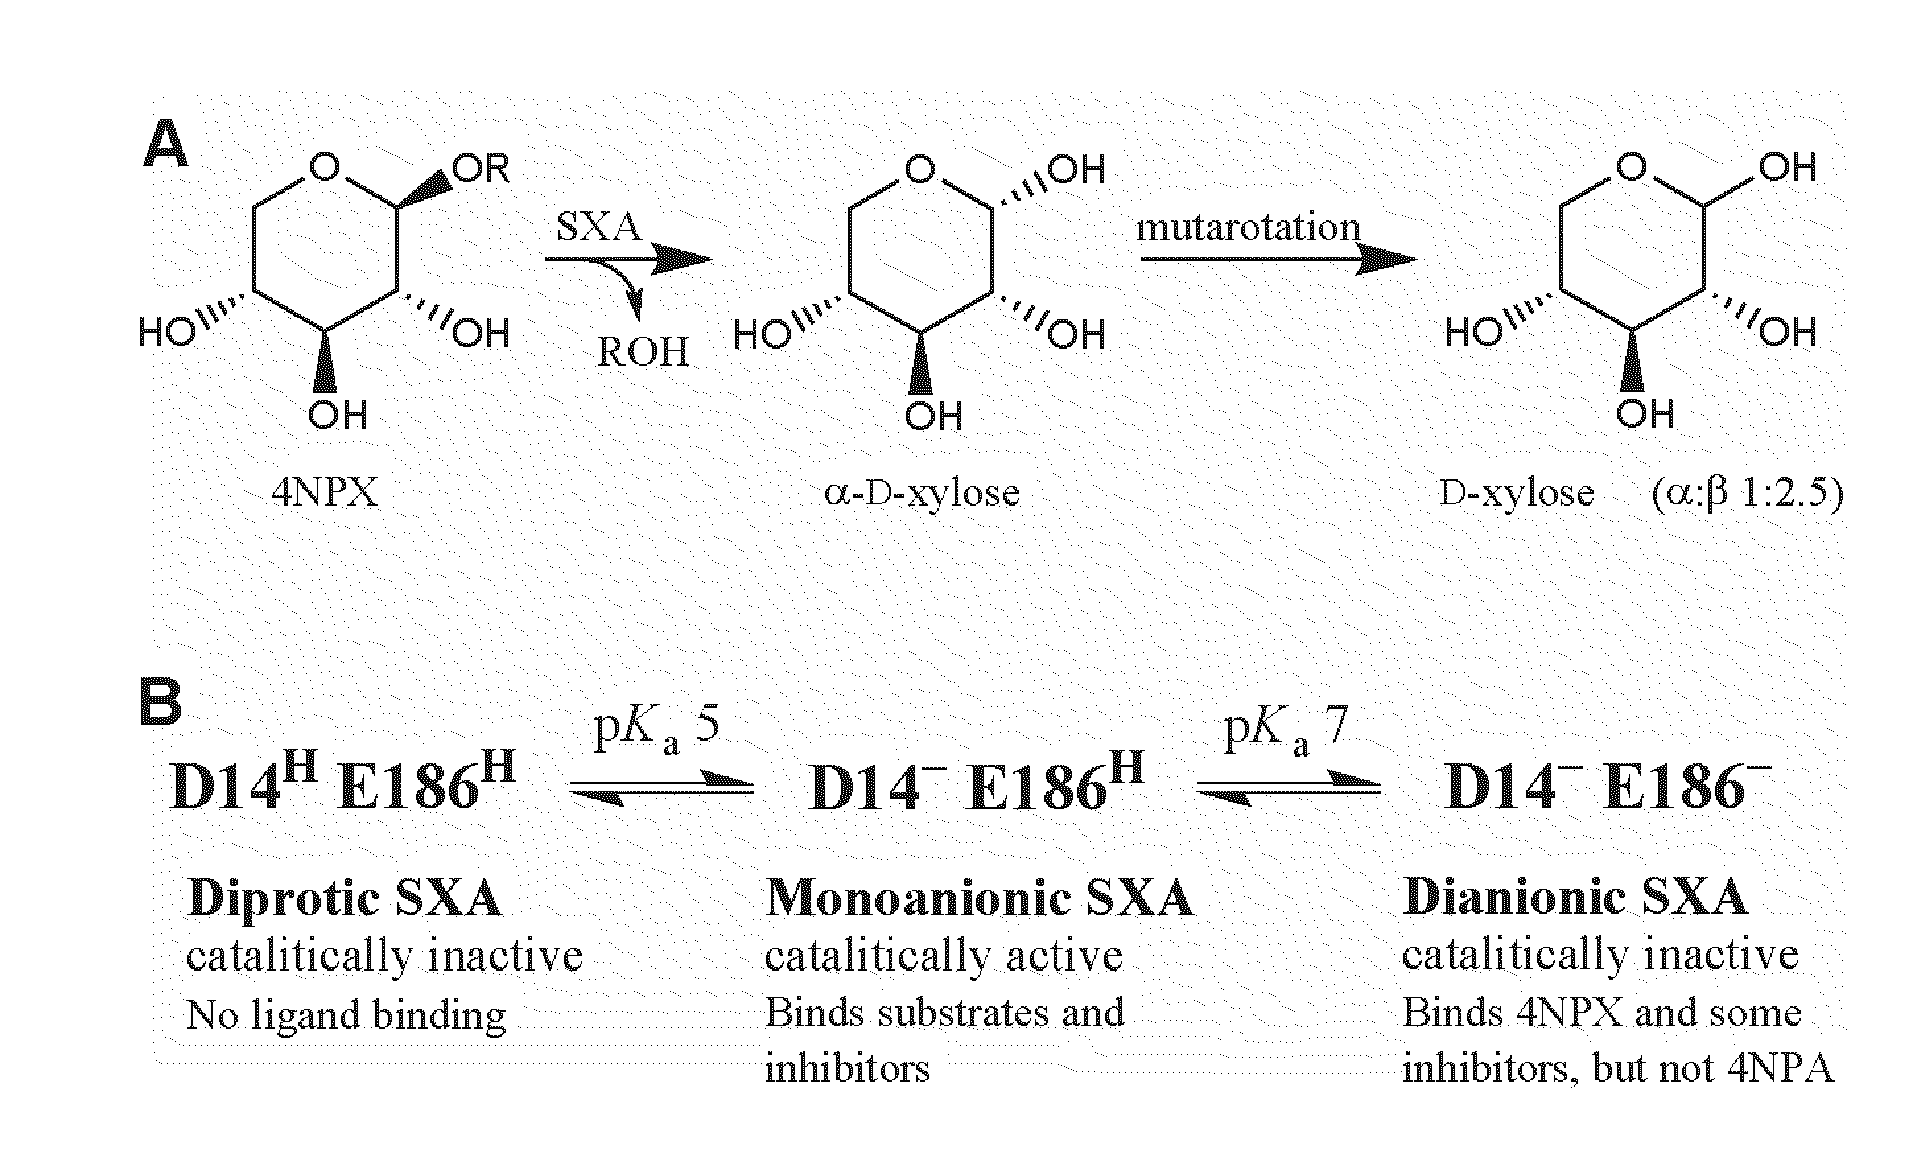 Beta-xylosidase for conversion of plant cell wall carbohydrates to simple sugars